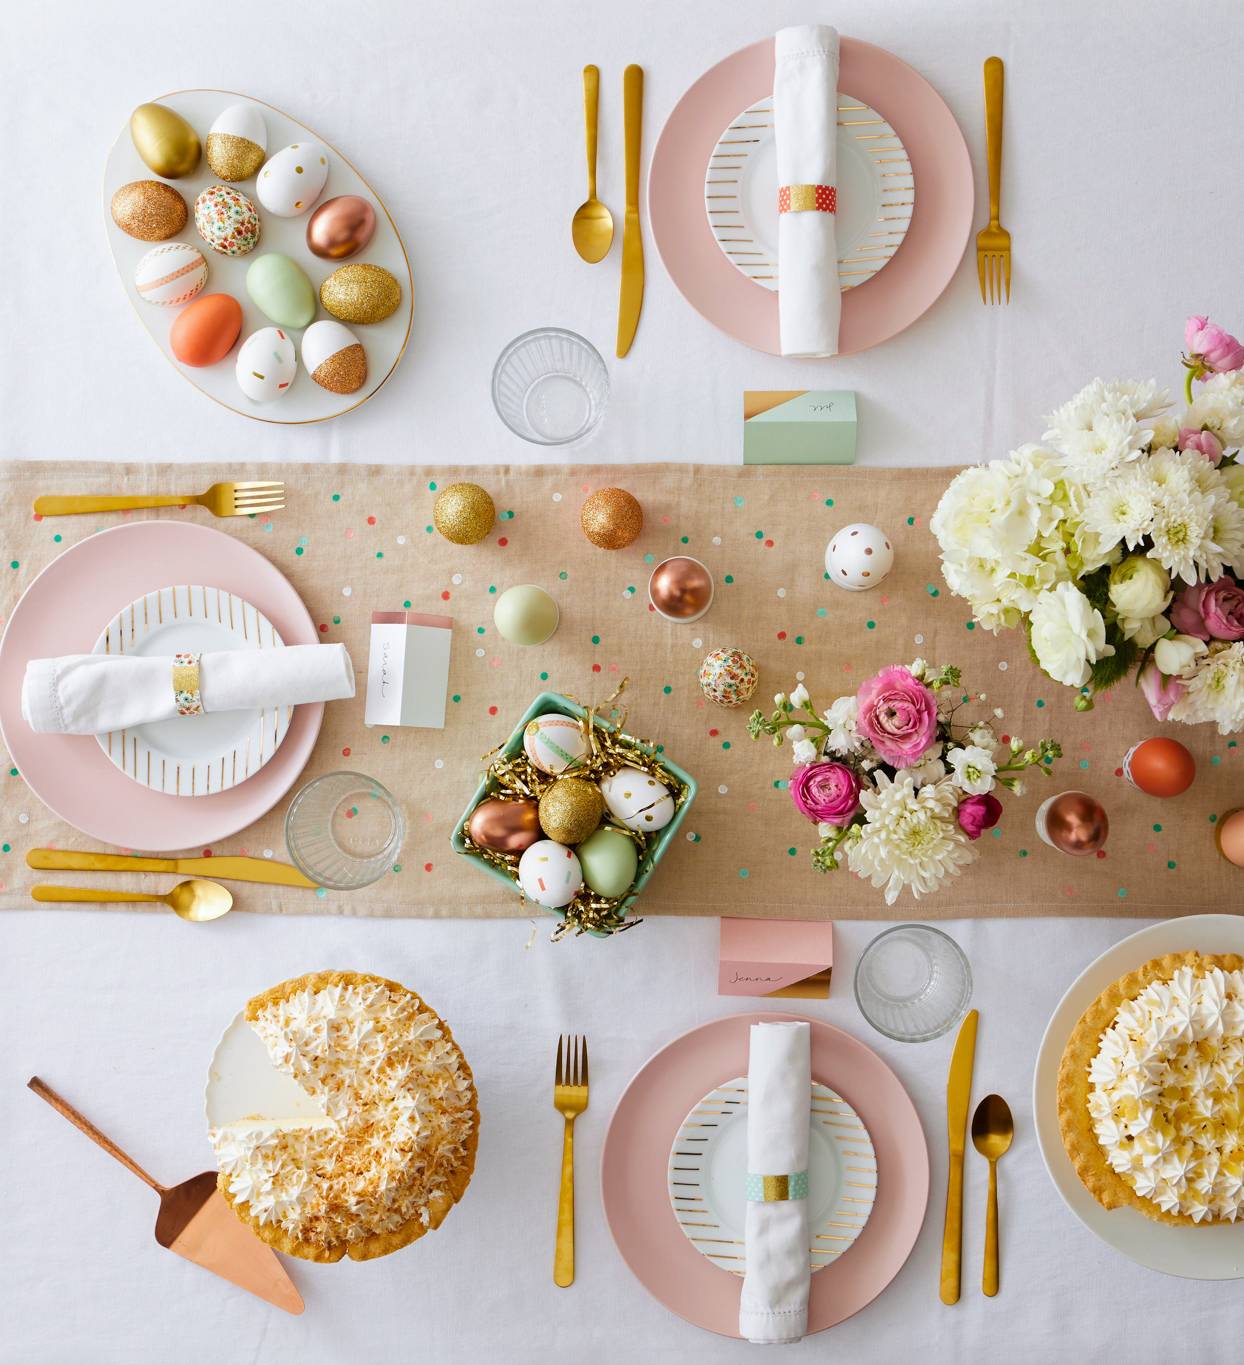 Adorable table setting for Easter (from BHG)